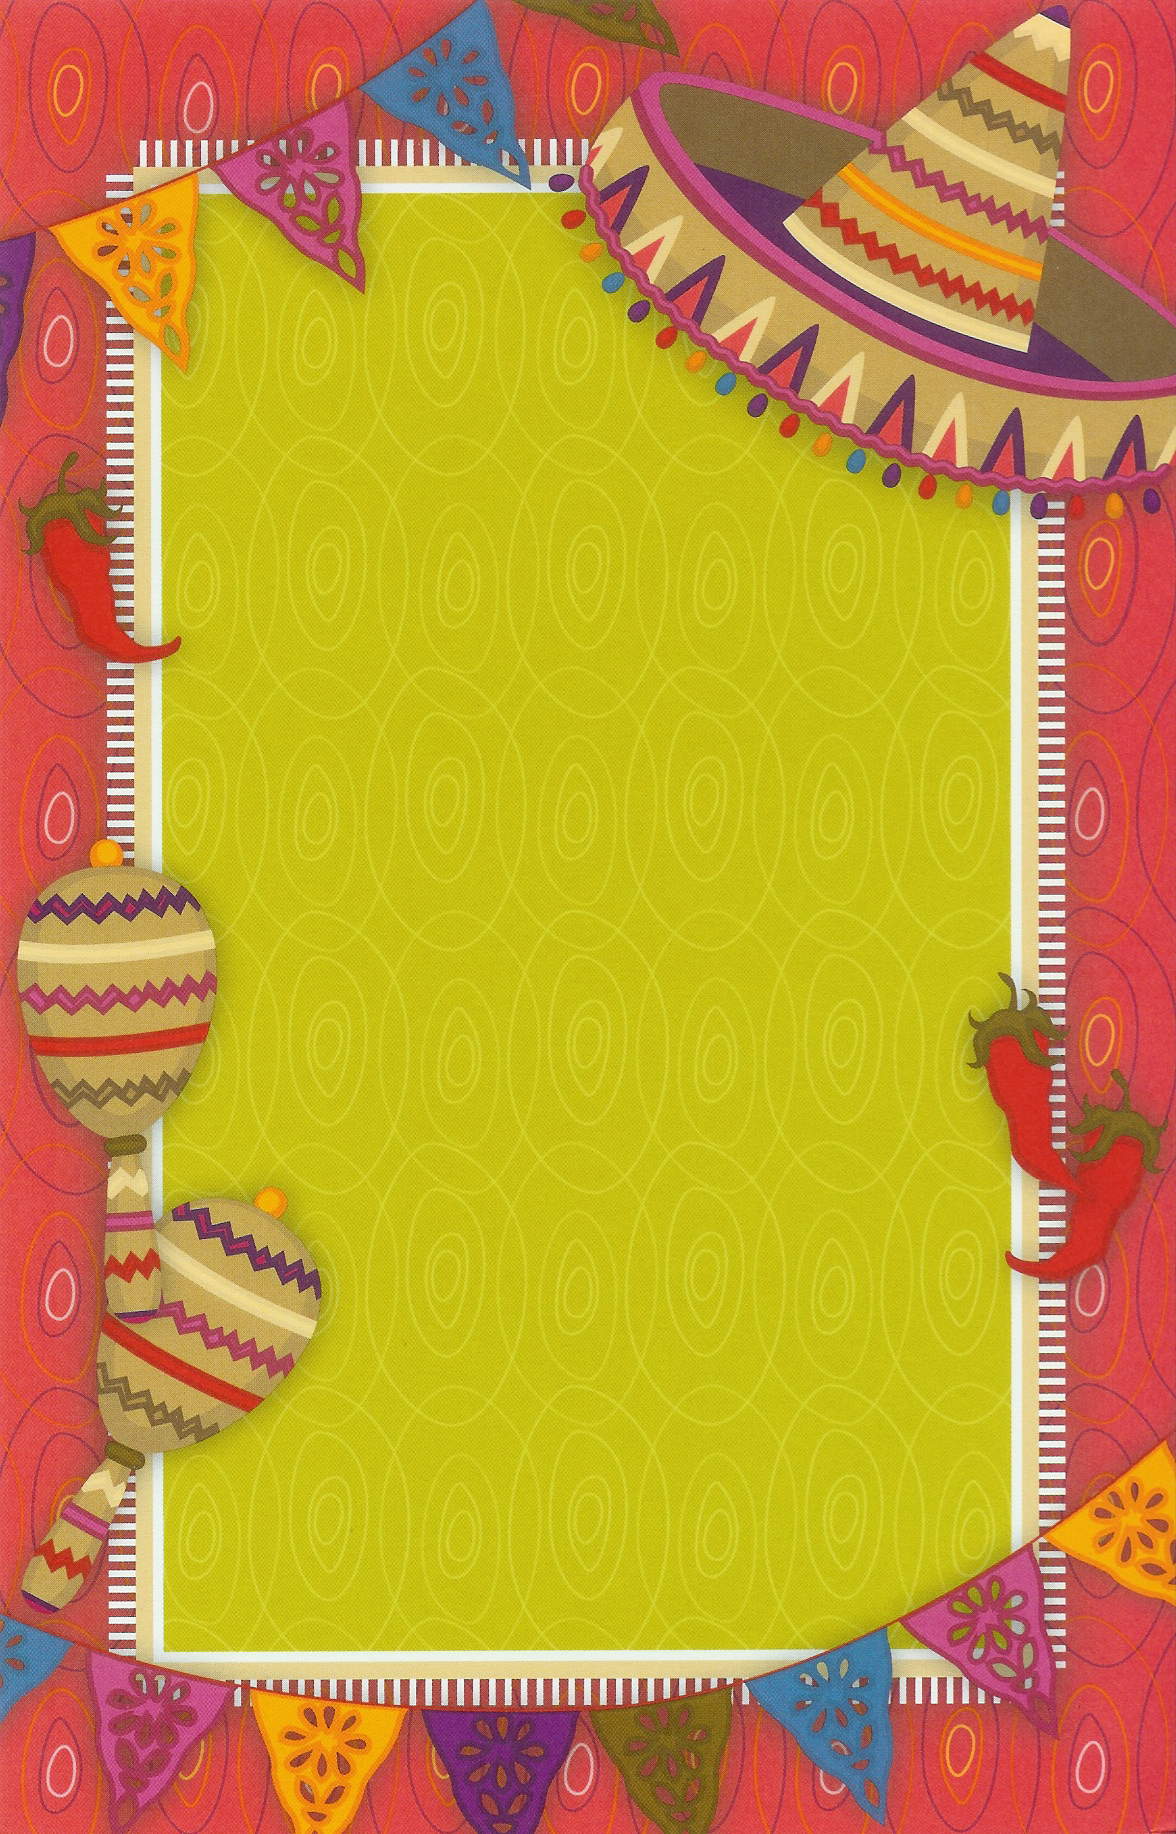 Hot Fiesta Invitation Cards And Free Printable Fiesta Party - Free Printable Fiesta Invitations